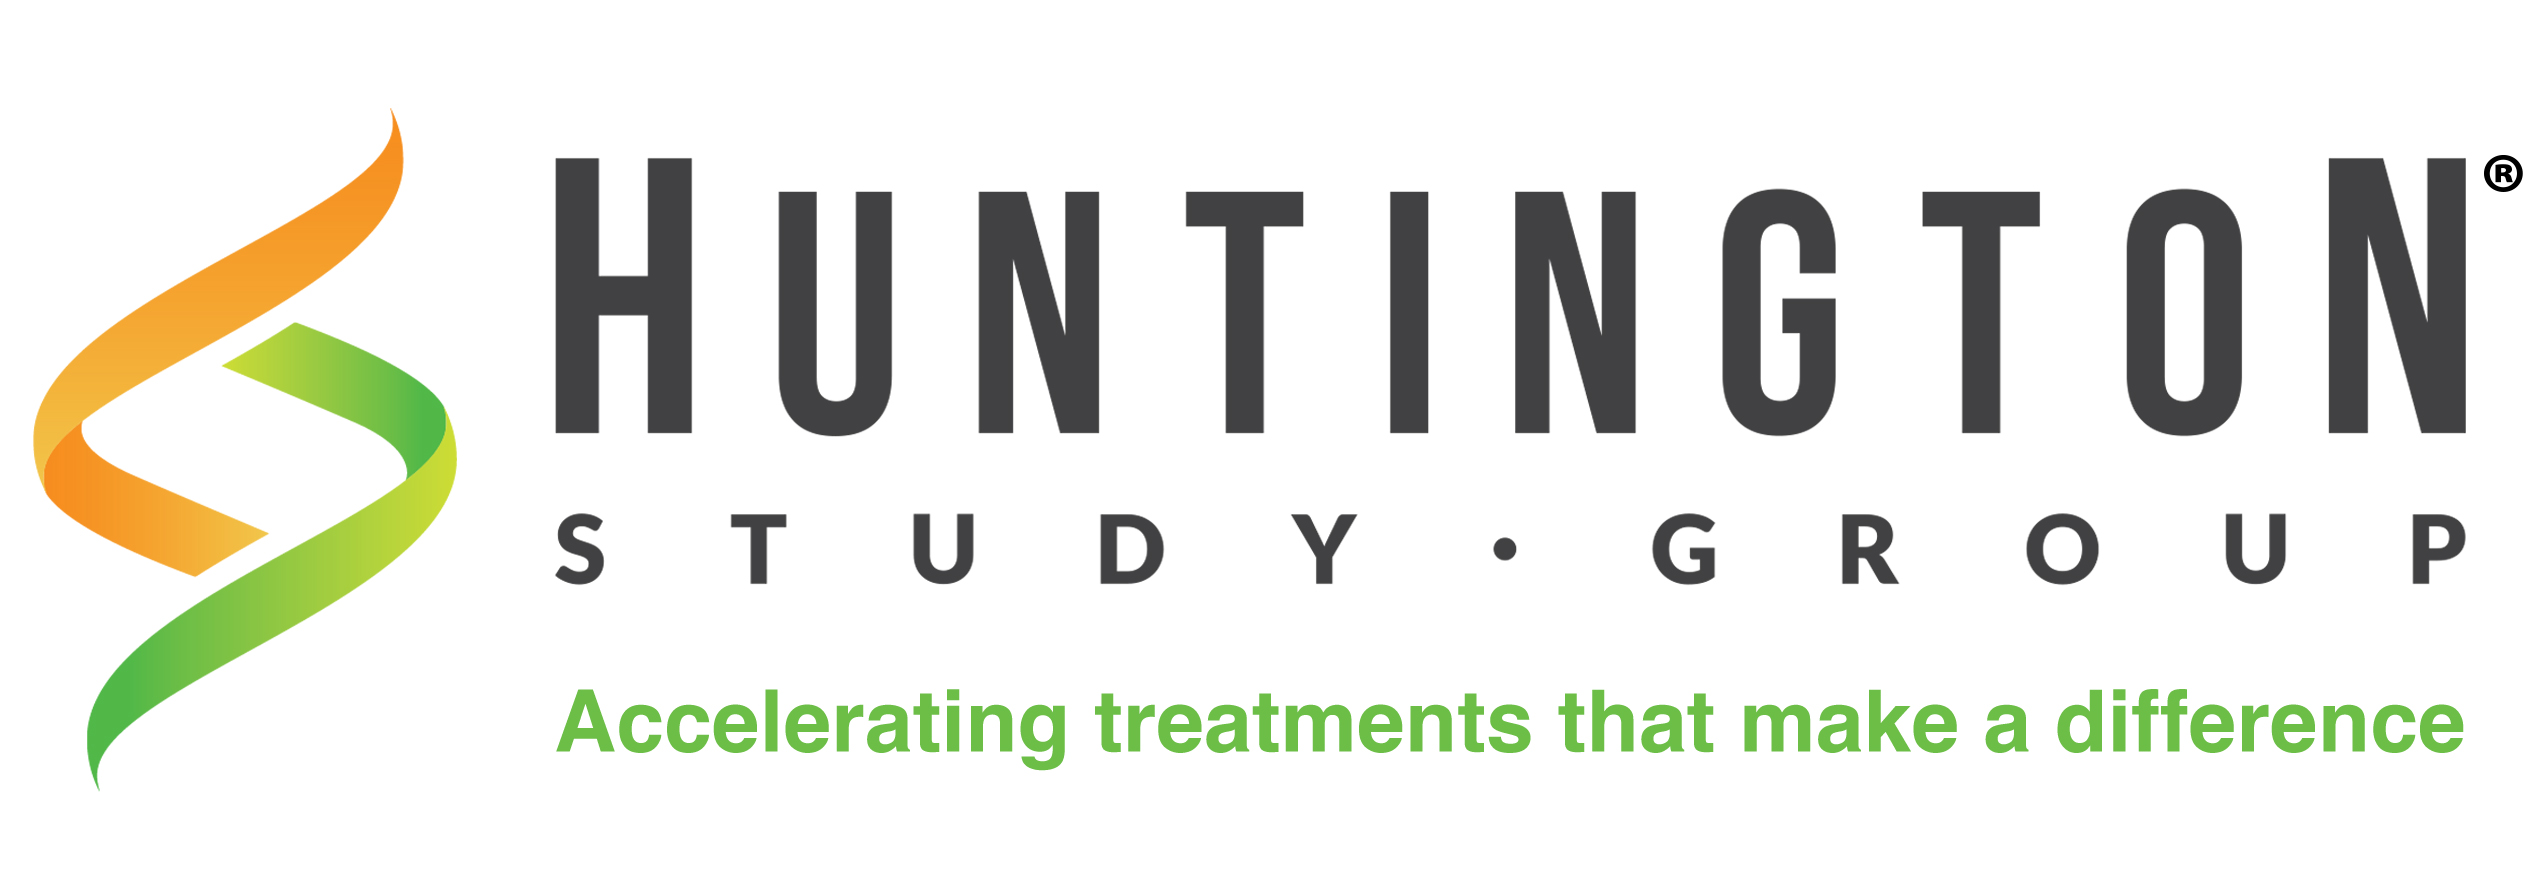 Huntington Study Group and Roche Collaborate on GENERATION HD2 Study